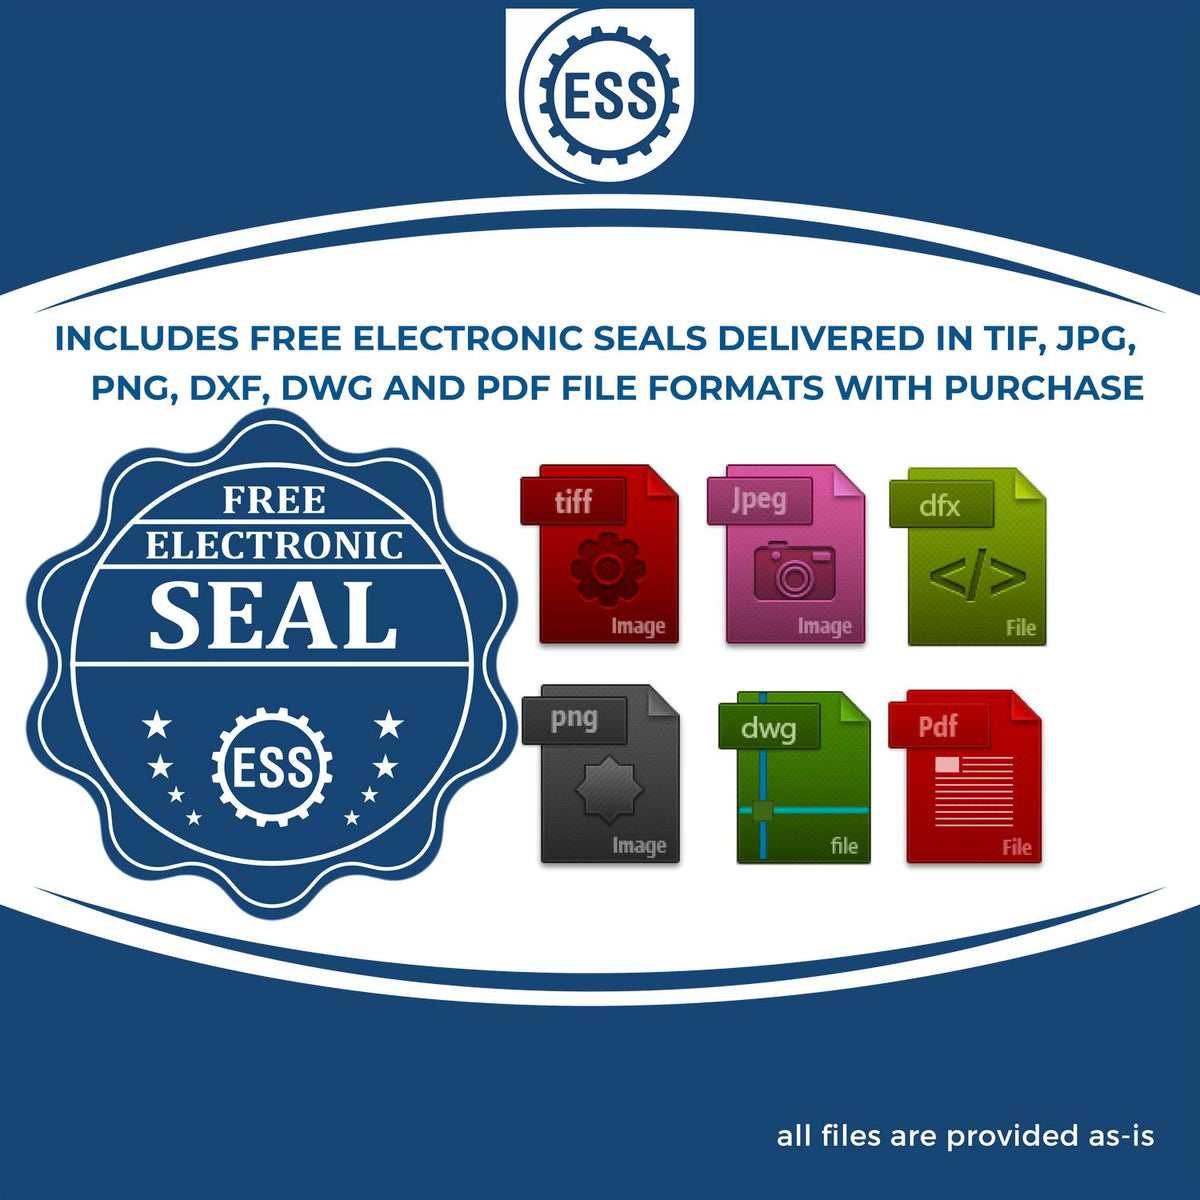 An infographic for the free electronic seal for the Gift Florida Landscape Architect Seal illustrating the different file type icons such as DXF, DWG, TIF, JPG and PNG.